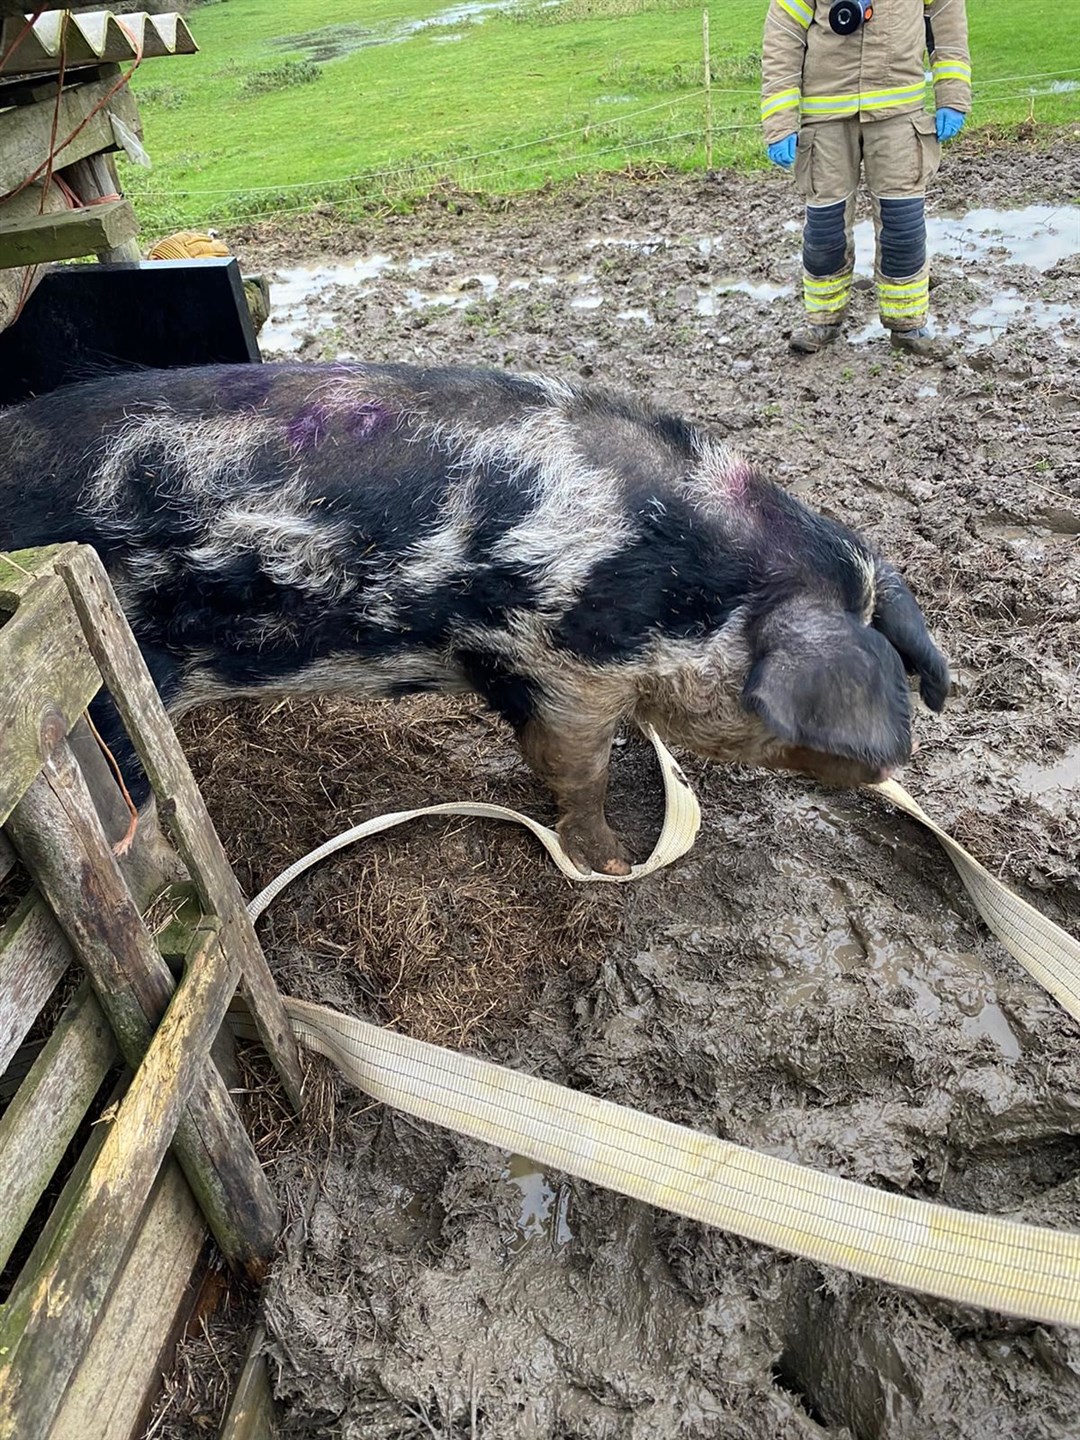 Firefighters rescued a 31-stone pig called Dolly who got stuck in the mud in Felsted, Essex (Essex County Fire and Rescue Service/PA)